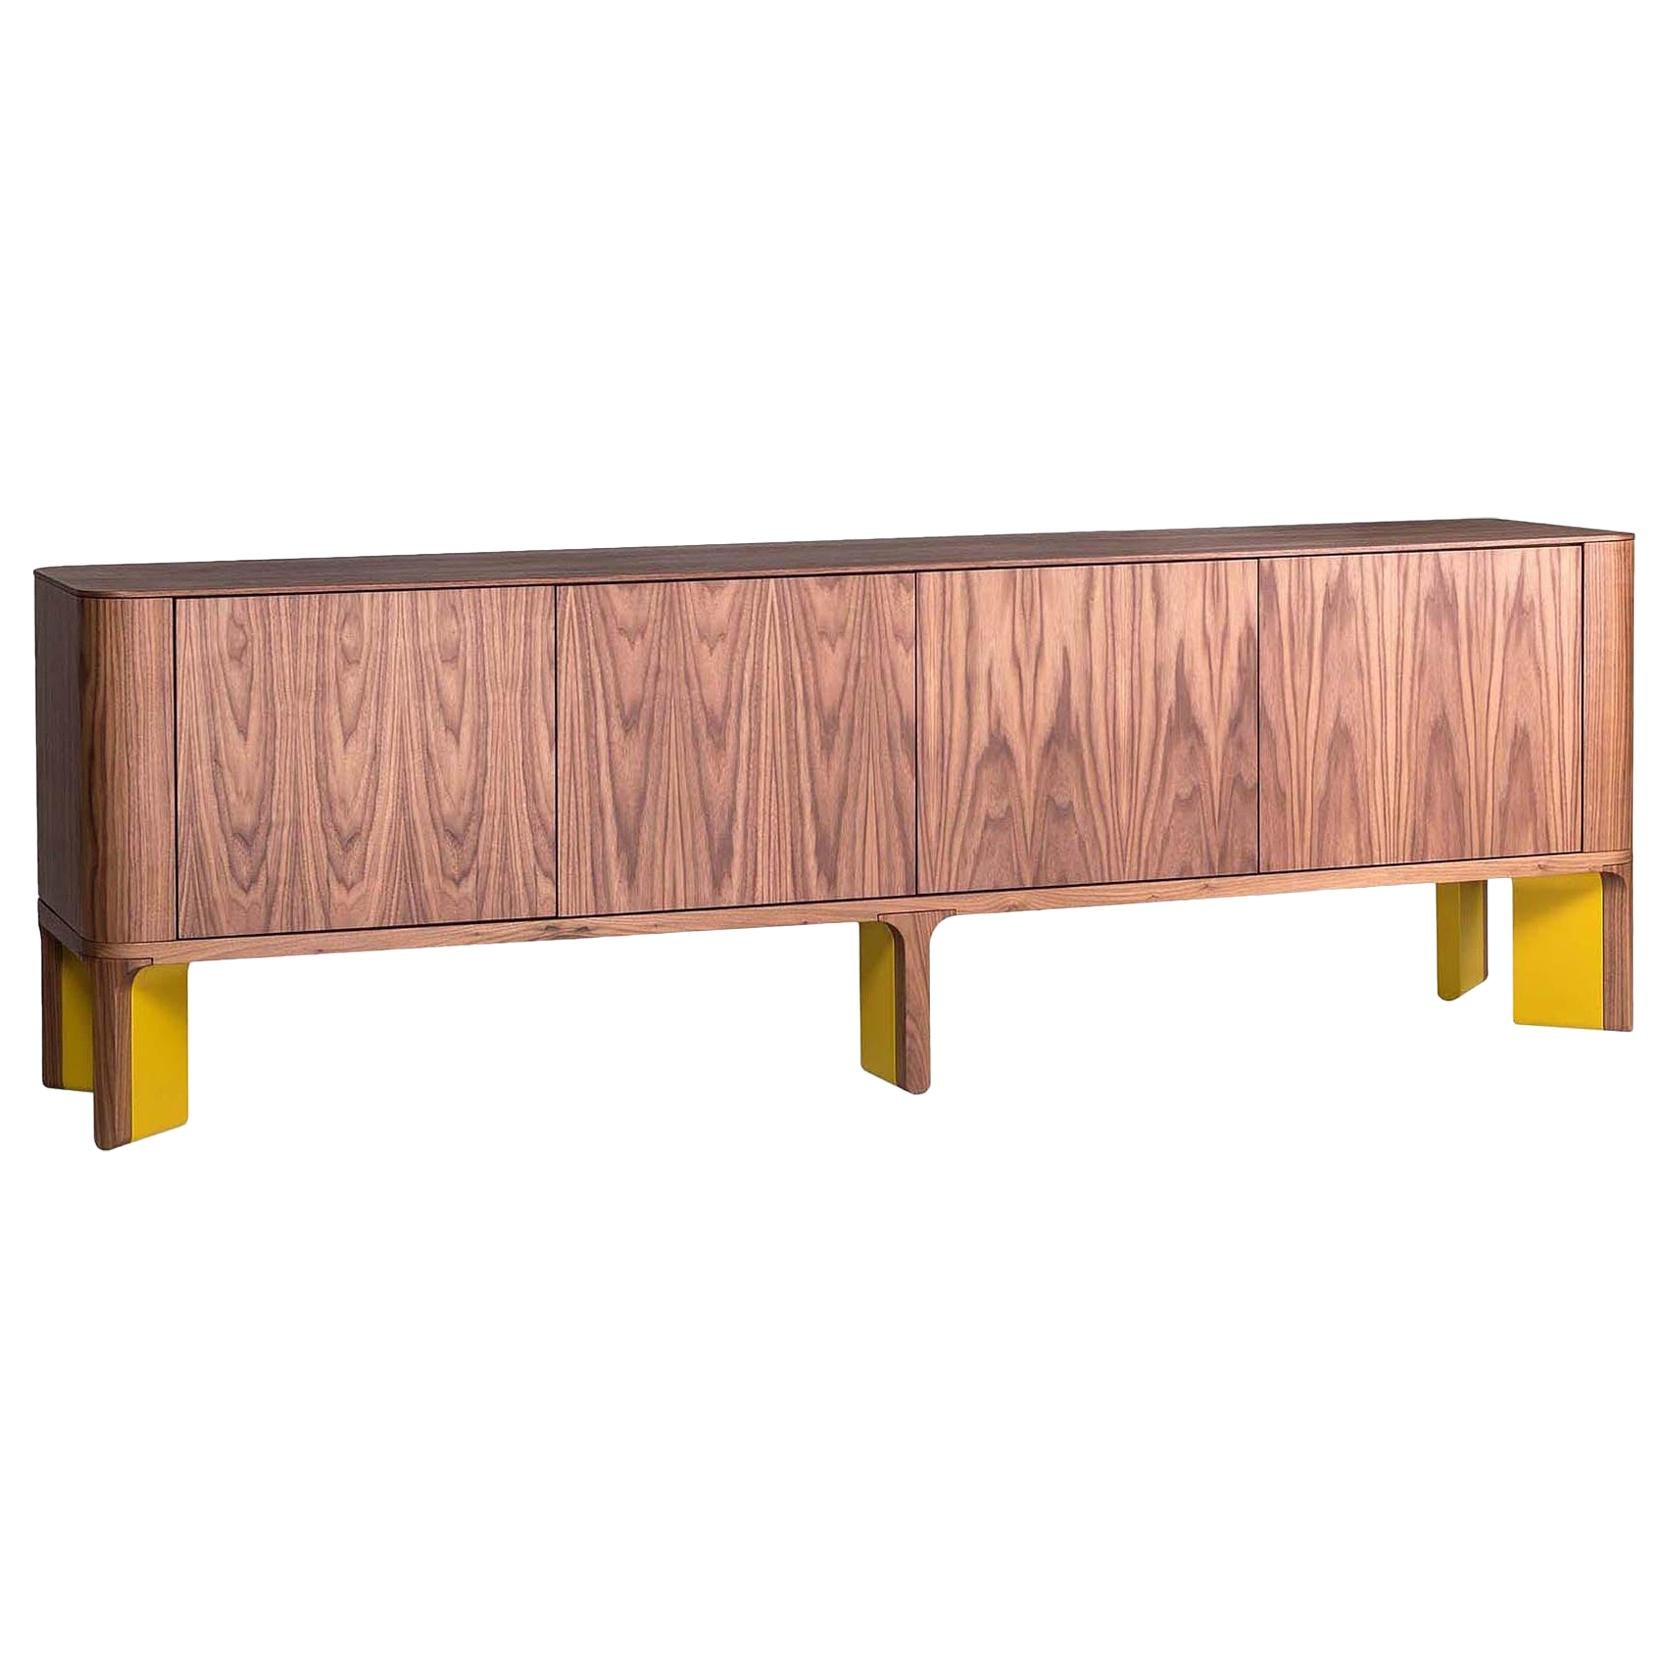 Contemporary Lacquered Sideboard with Round Corners.